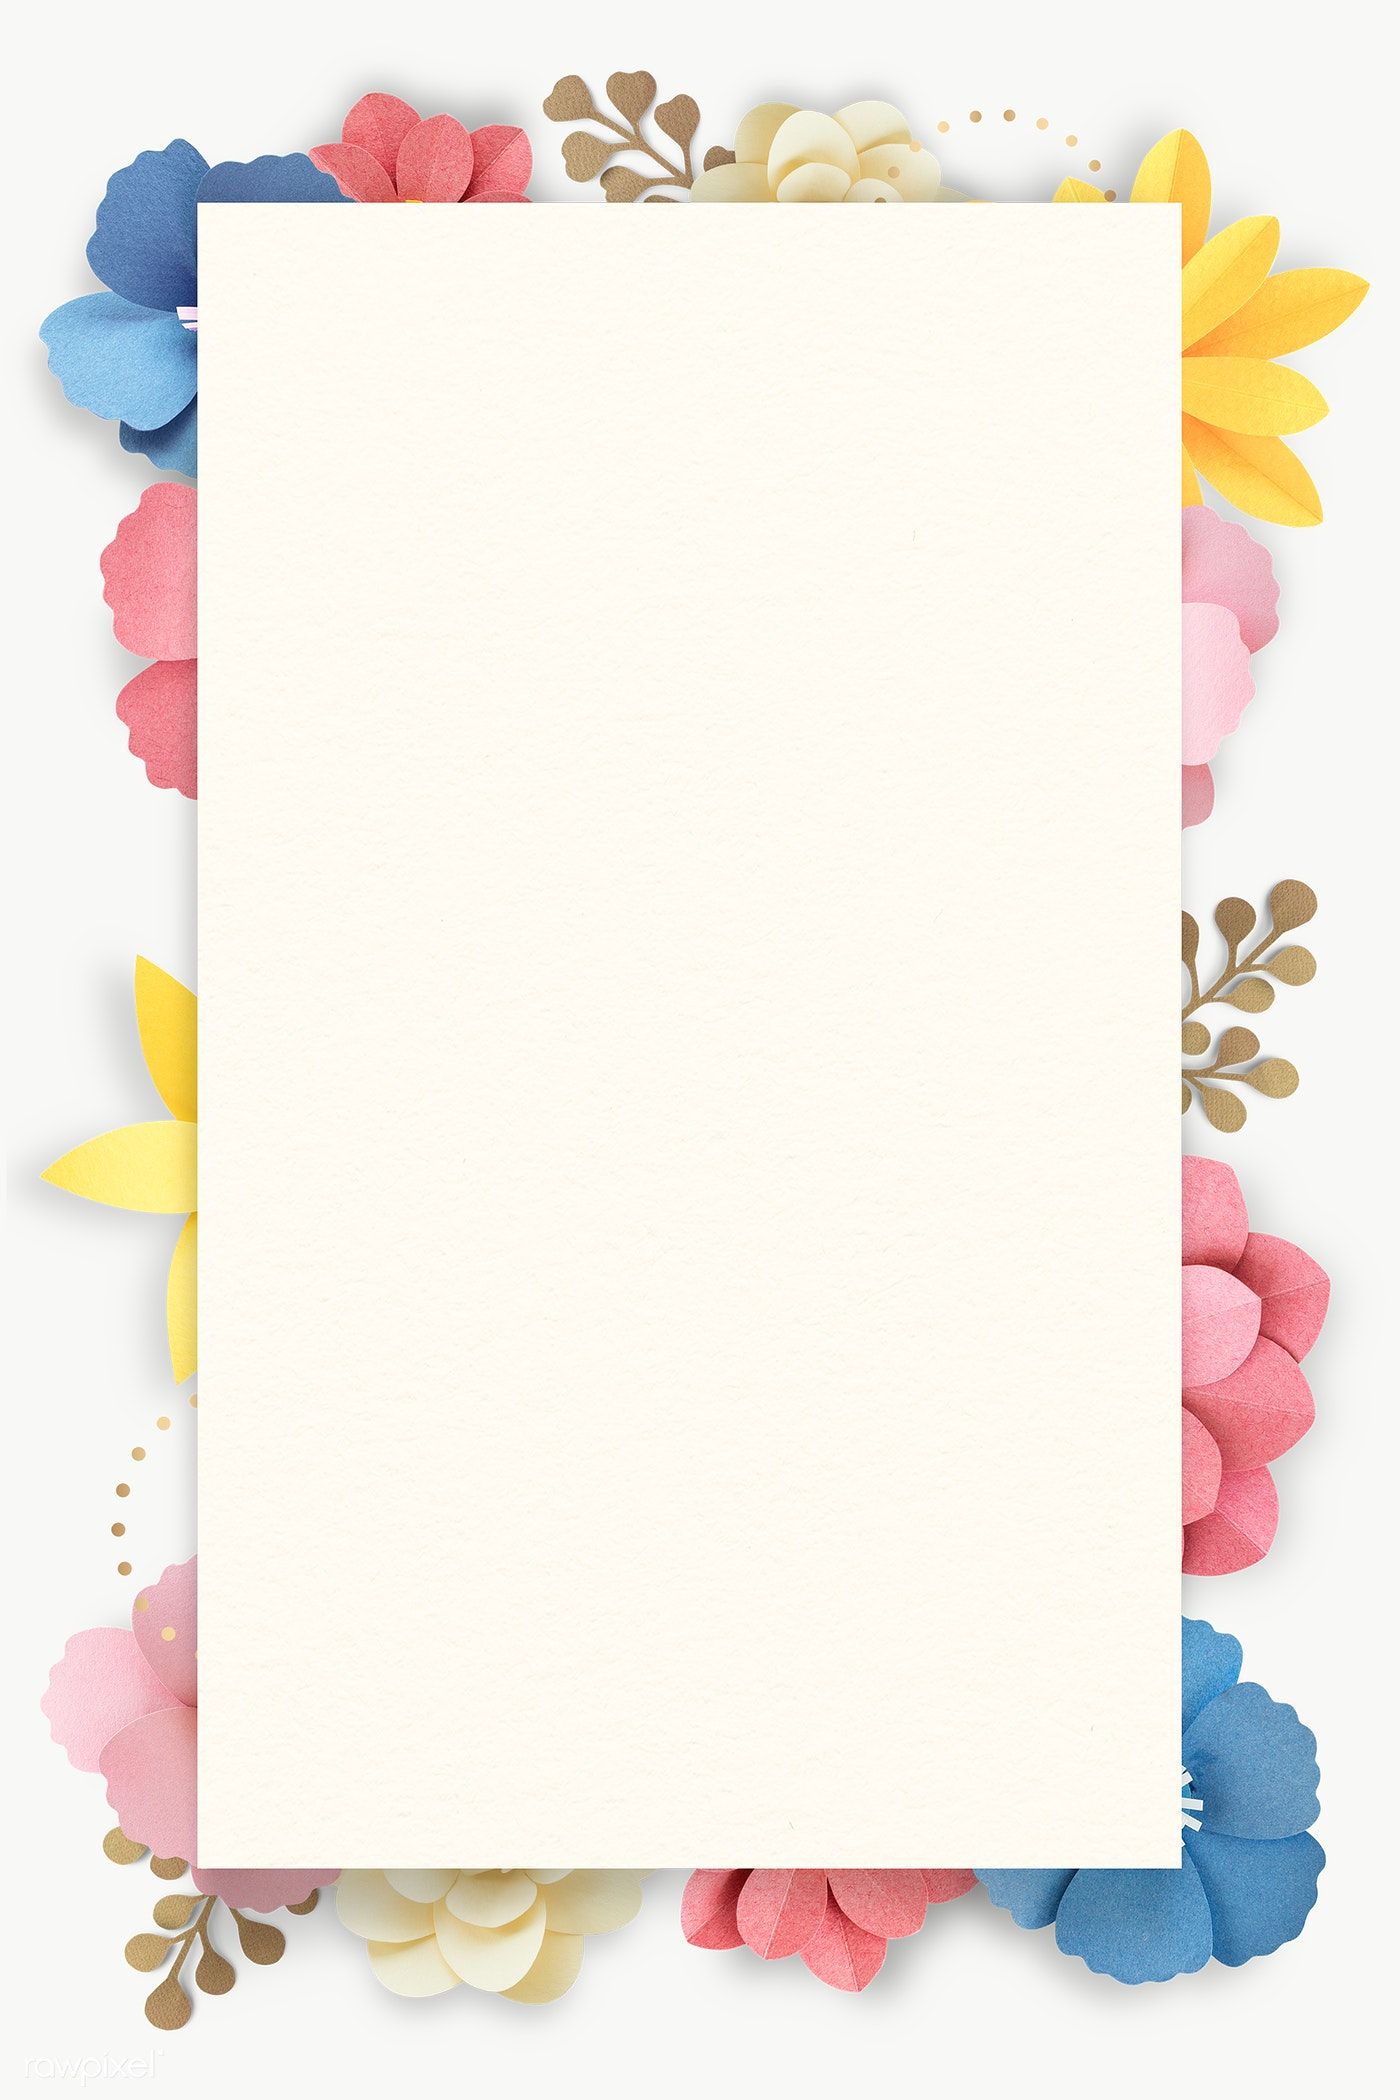 Download free png of Wild flower decorated paper frame transparent png.jpg